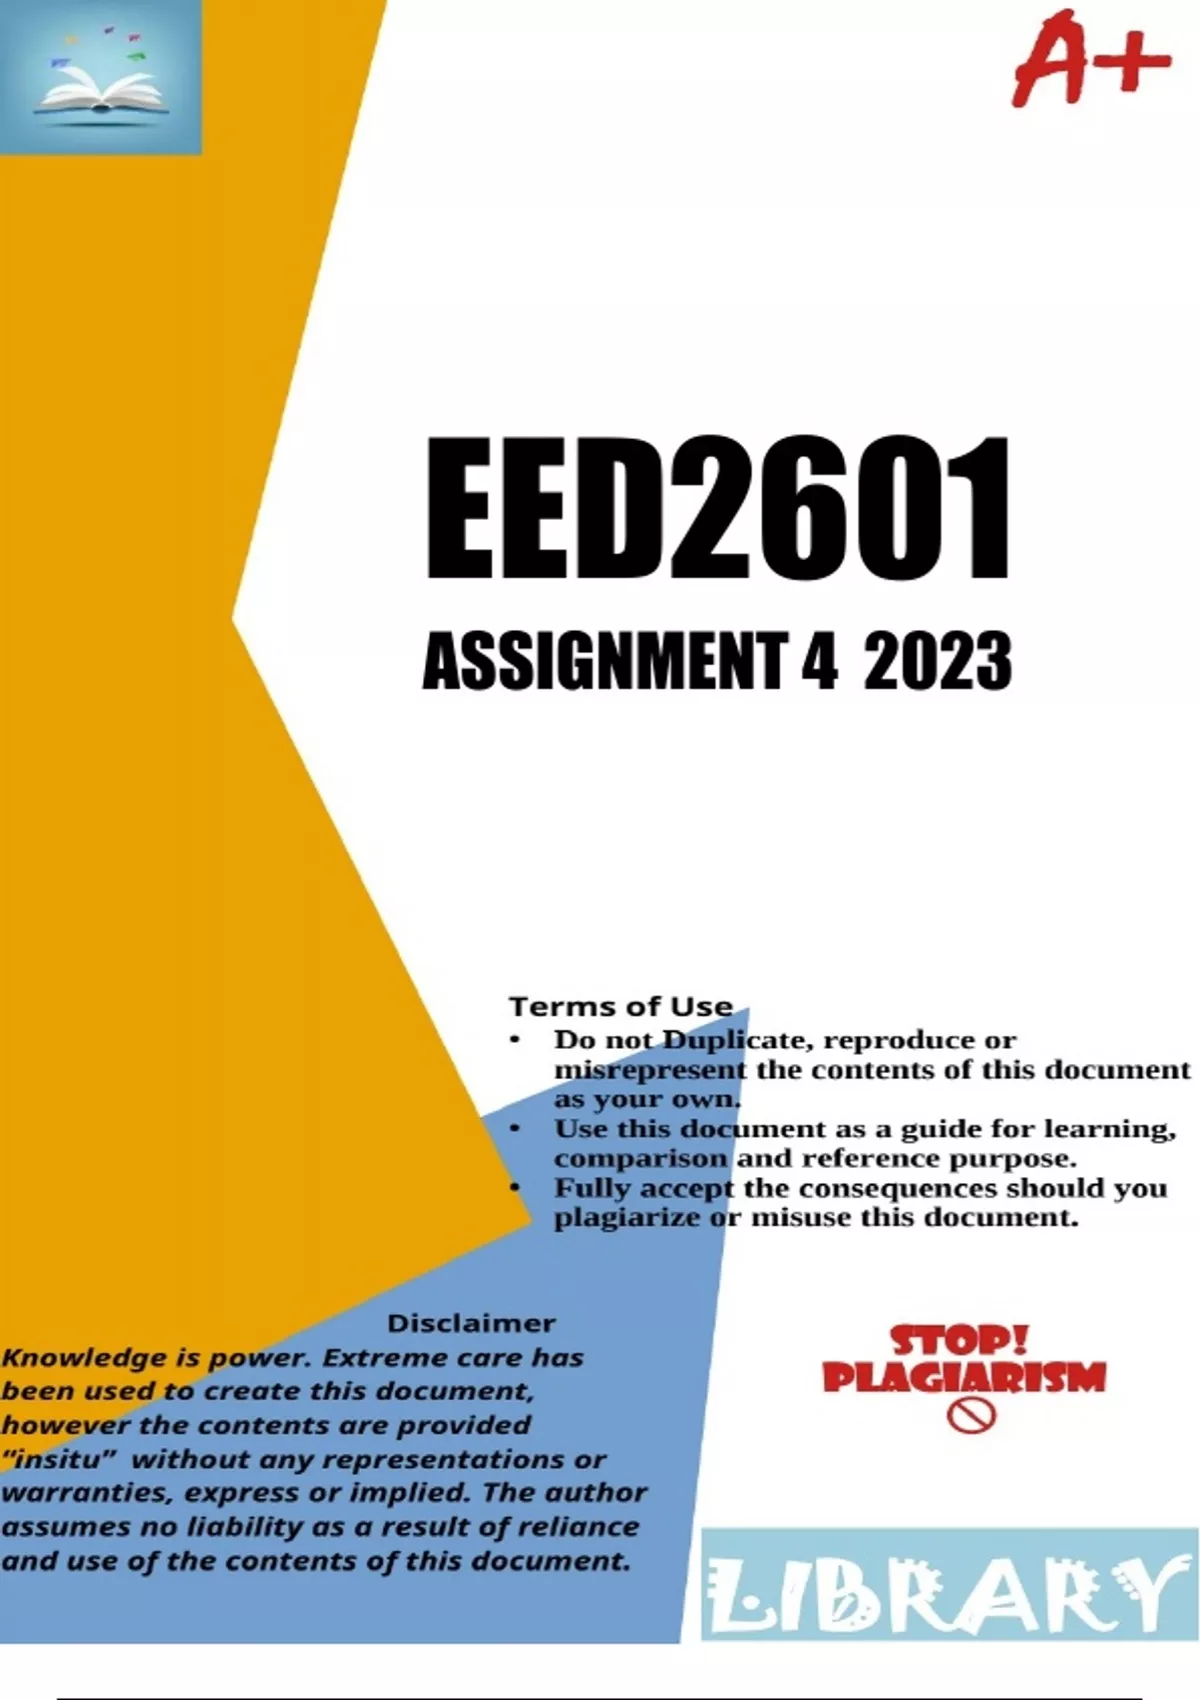 eed2601 assignment 4 answers pdf download 2023